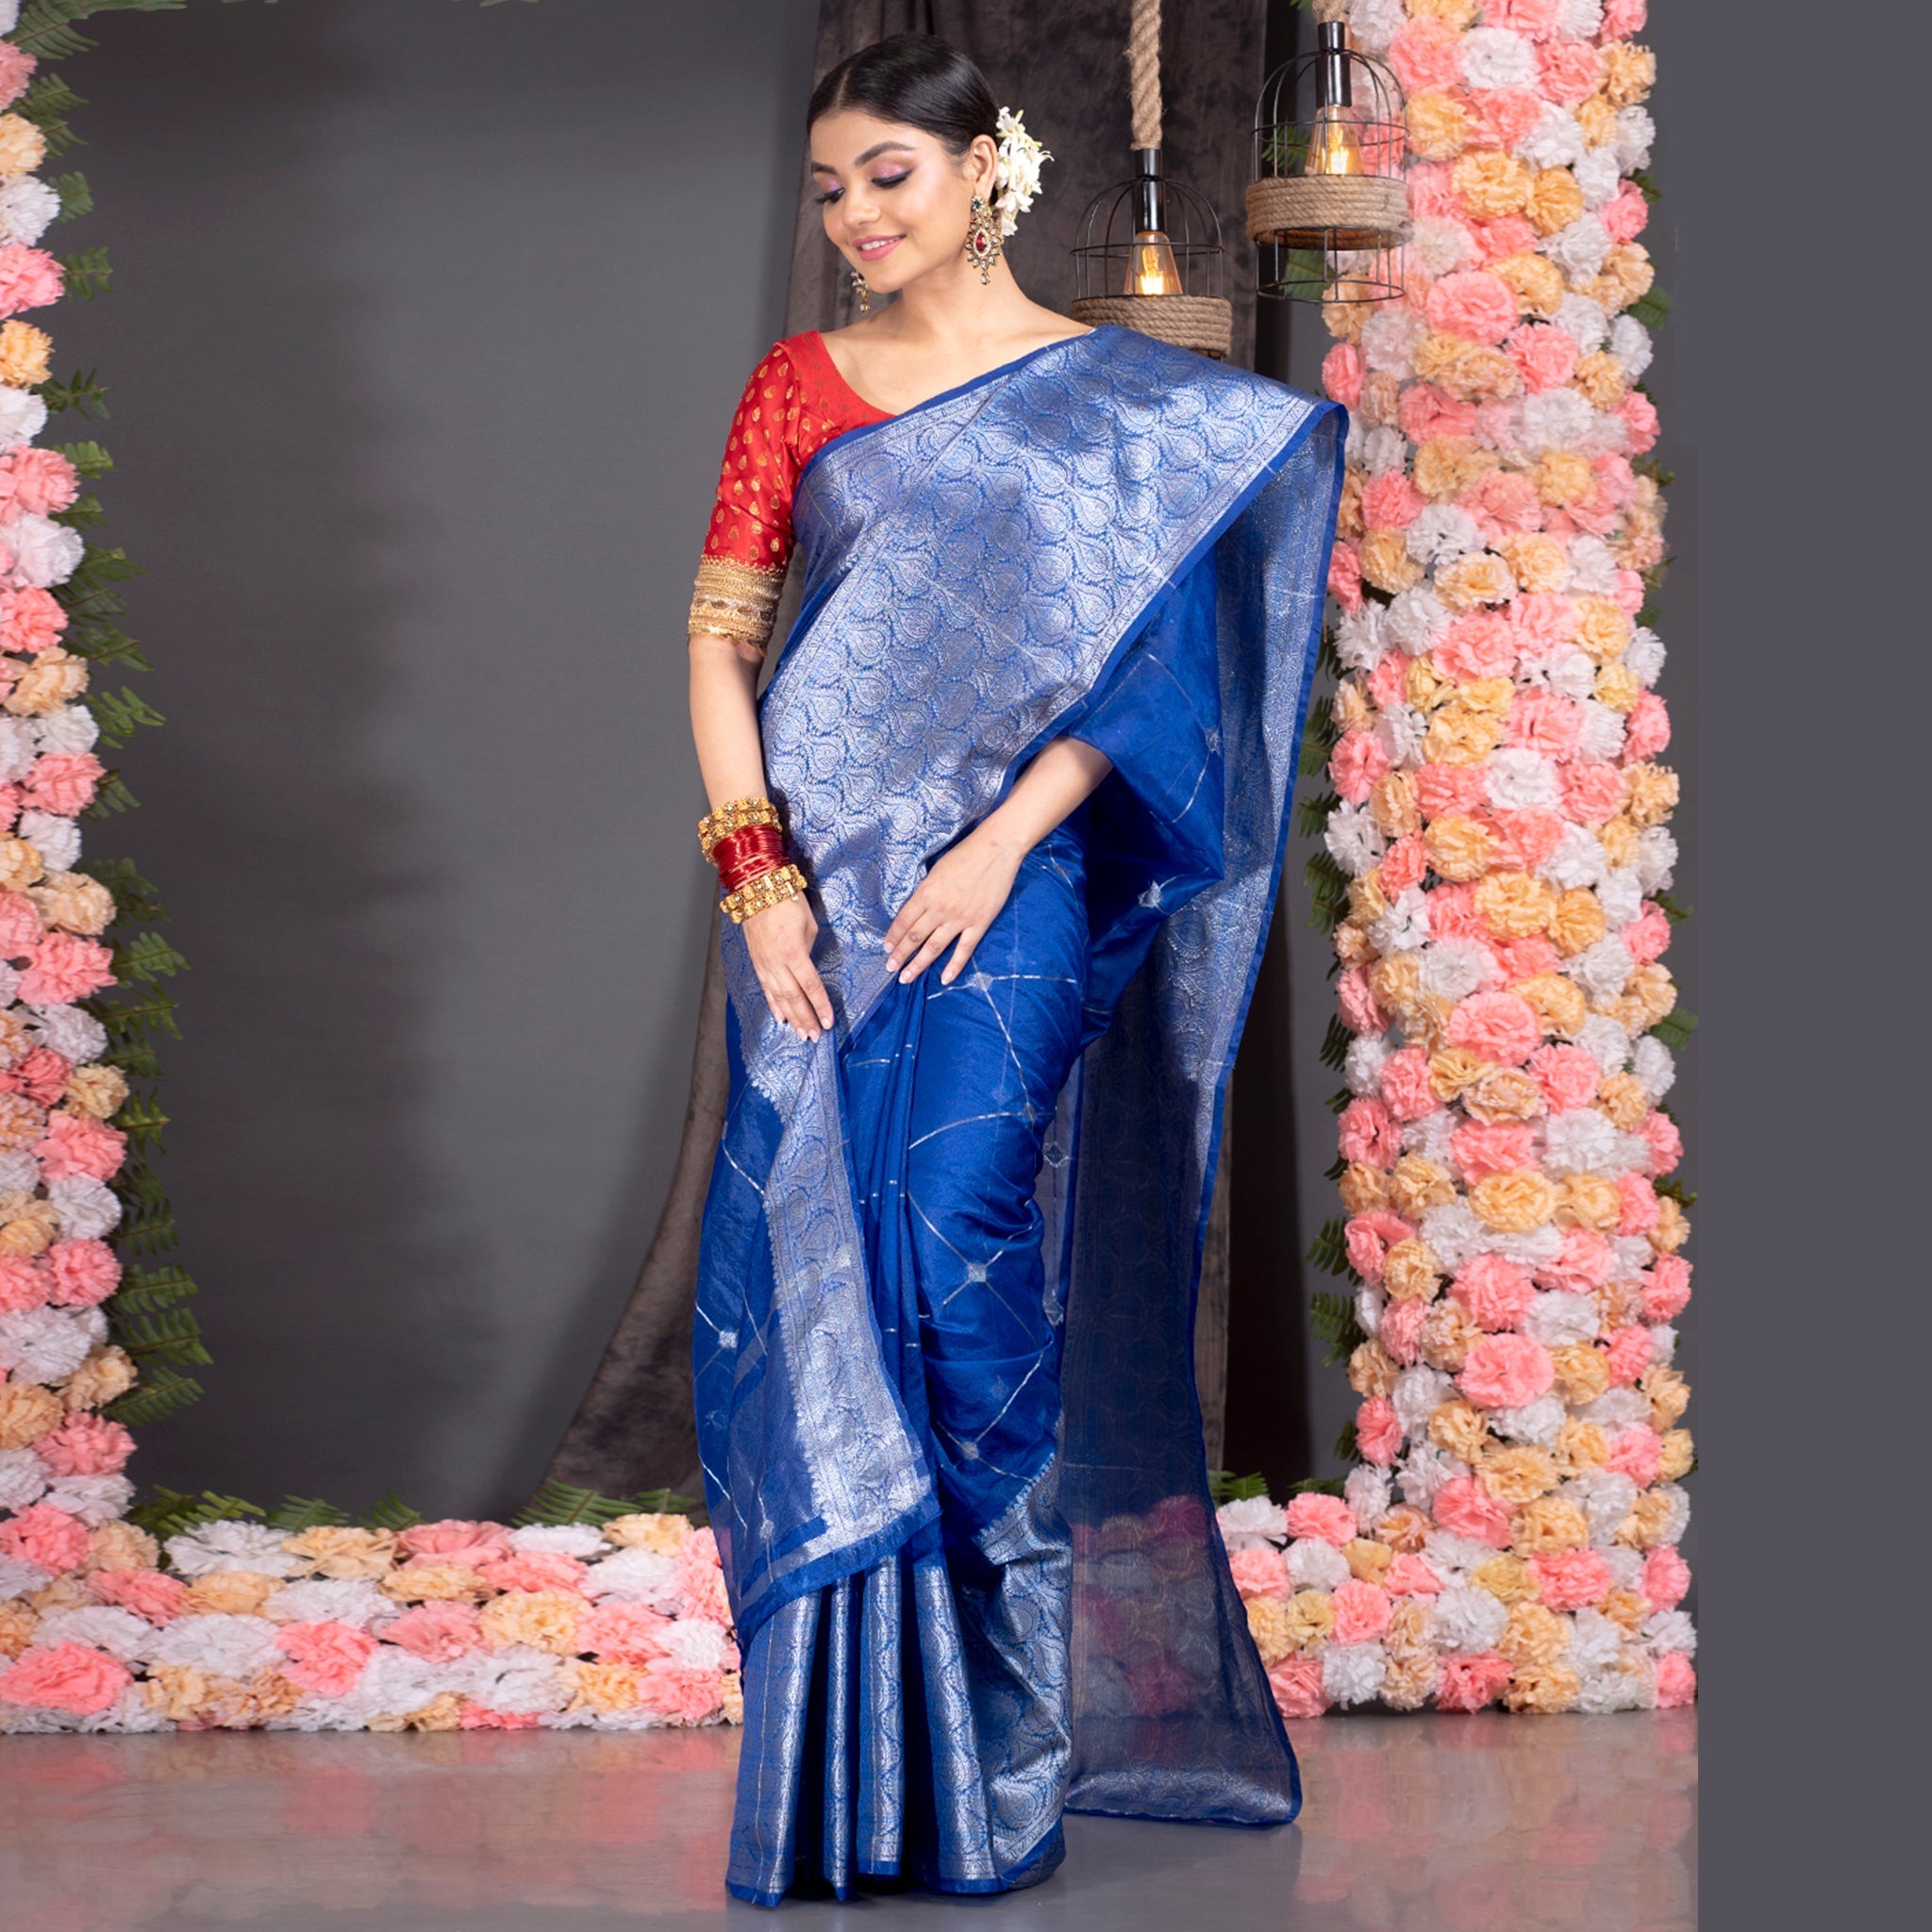 Women's Royal Blue Organza Saree With Square Motifs And Ambi Jaal Border - Boveee